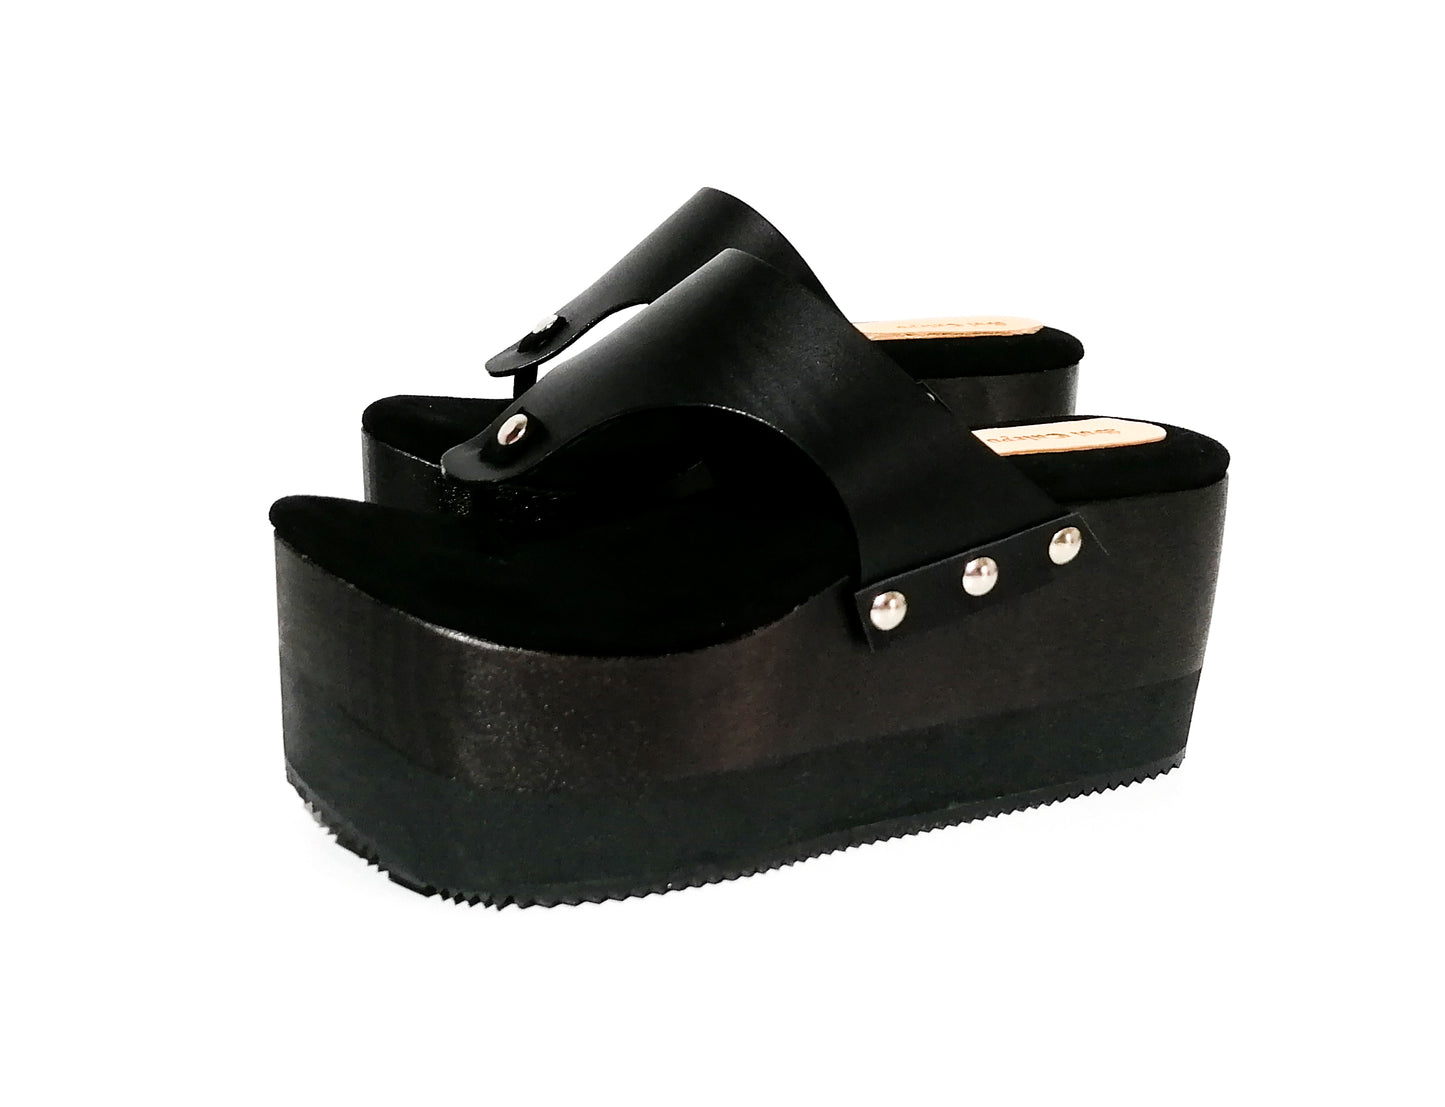 Black flip flop style platform clog sandal. Platform wedge. Black leather flip flop style sandal. Sizes 34 to 47. High quality leather shoes handmade by Sol Caleyo.